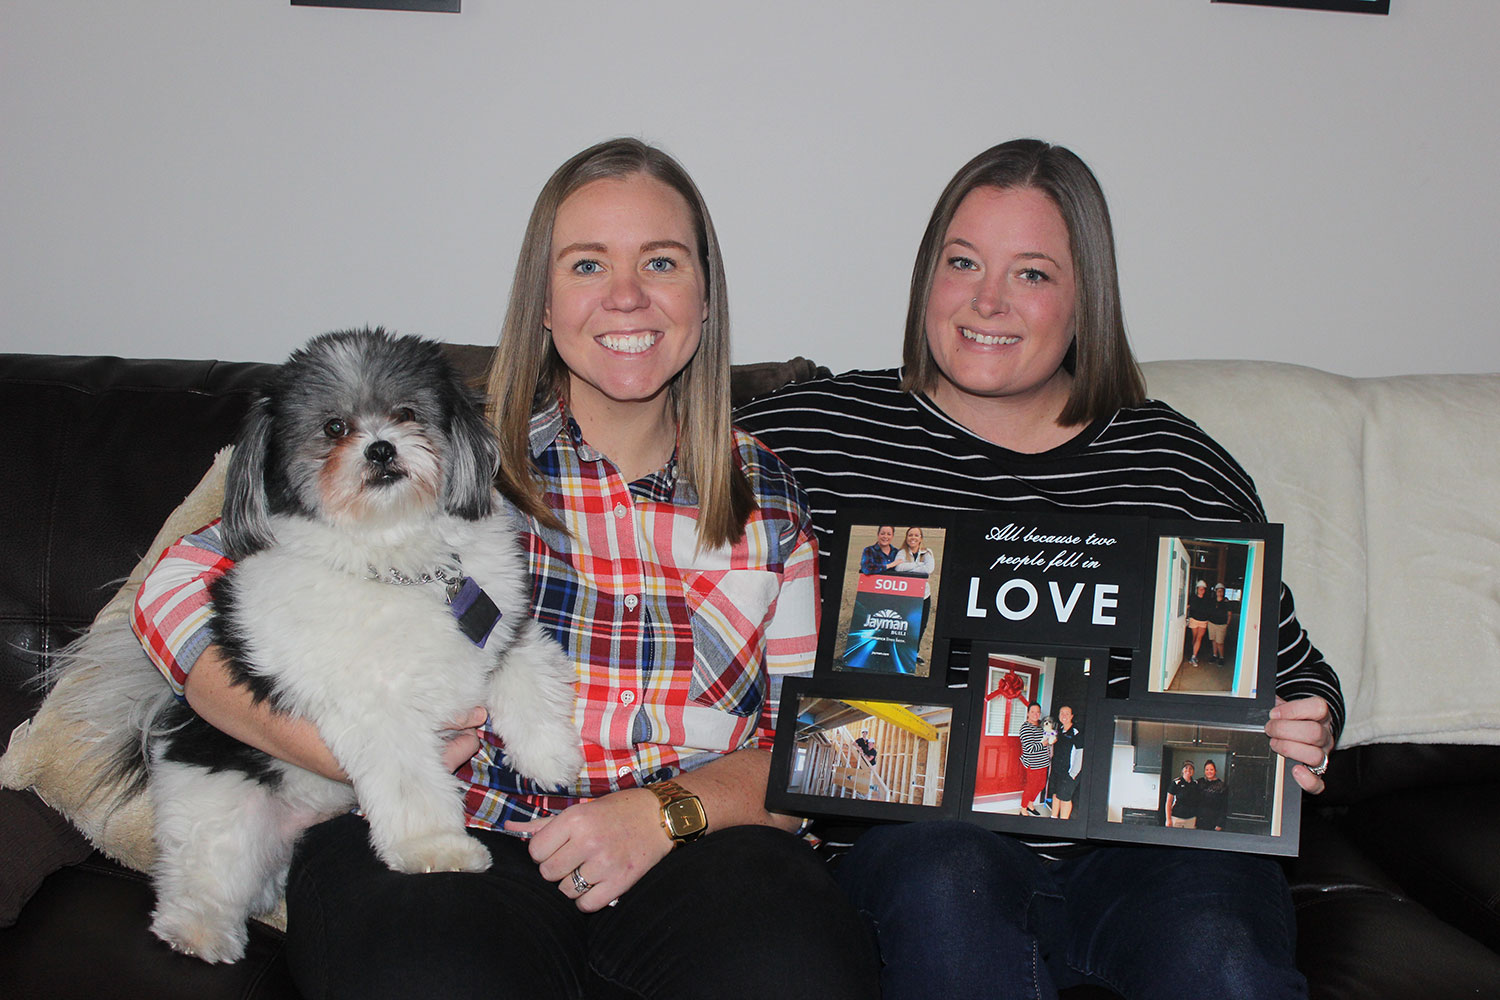 Michelle and Hollie Cressy with their dog Nixon.
Andrea Cox / For CREB®Now